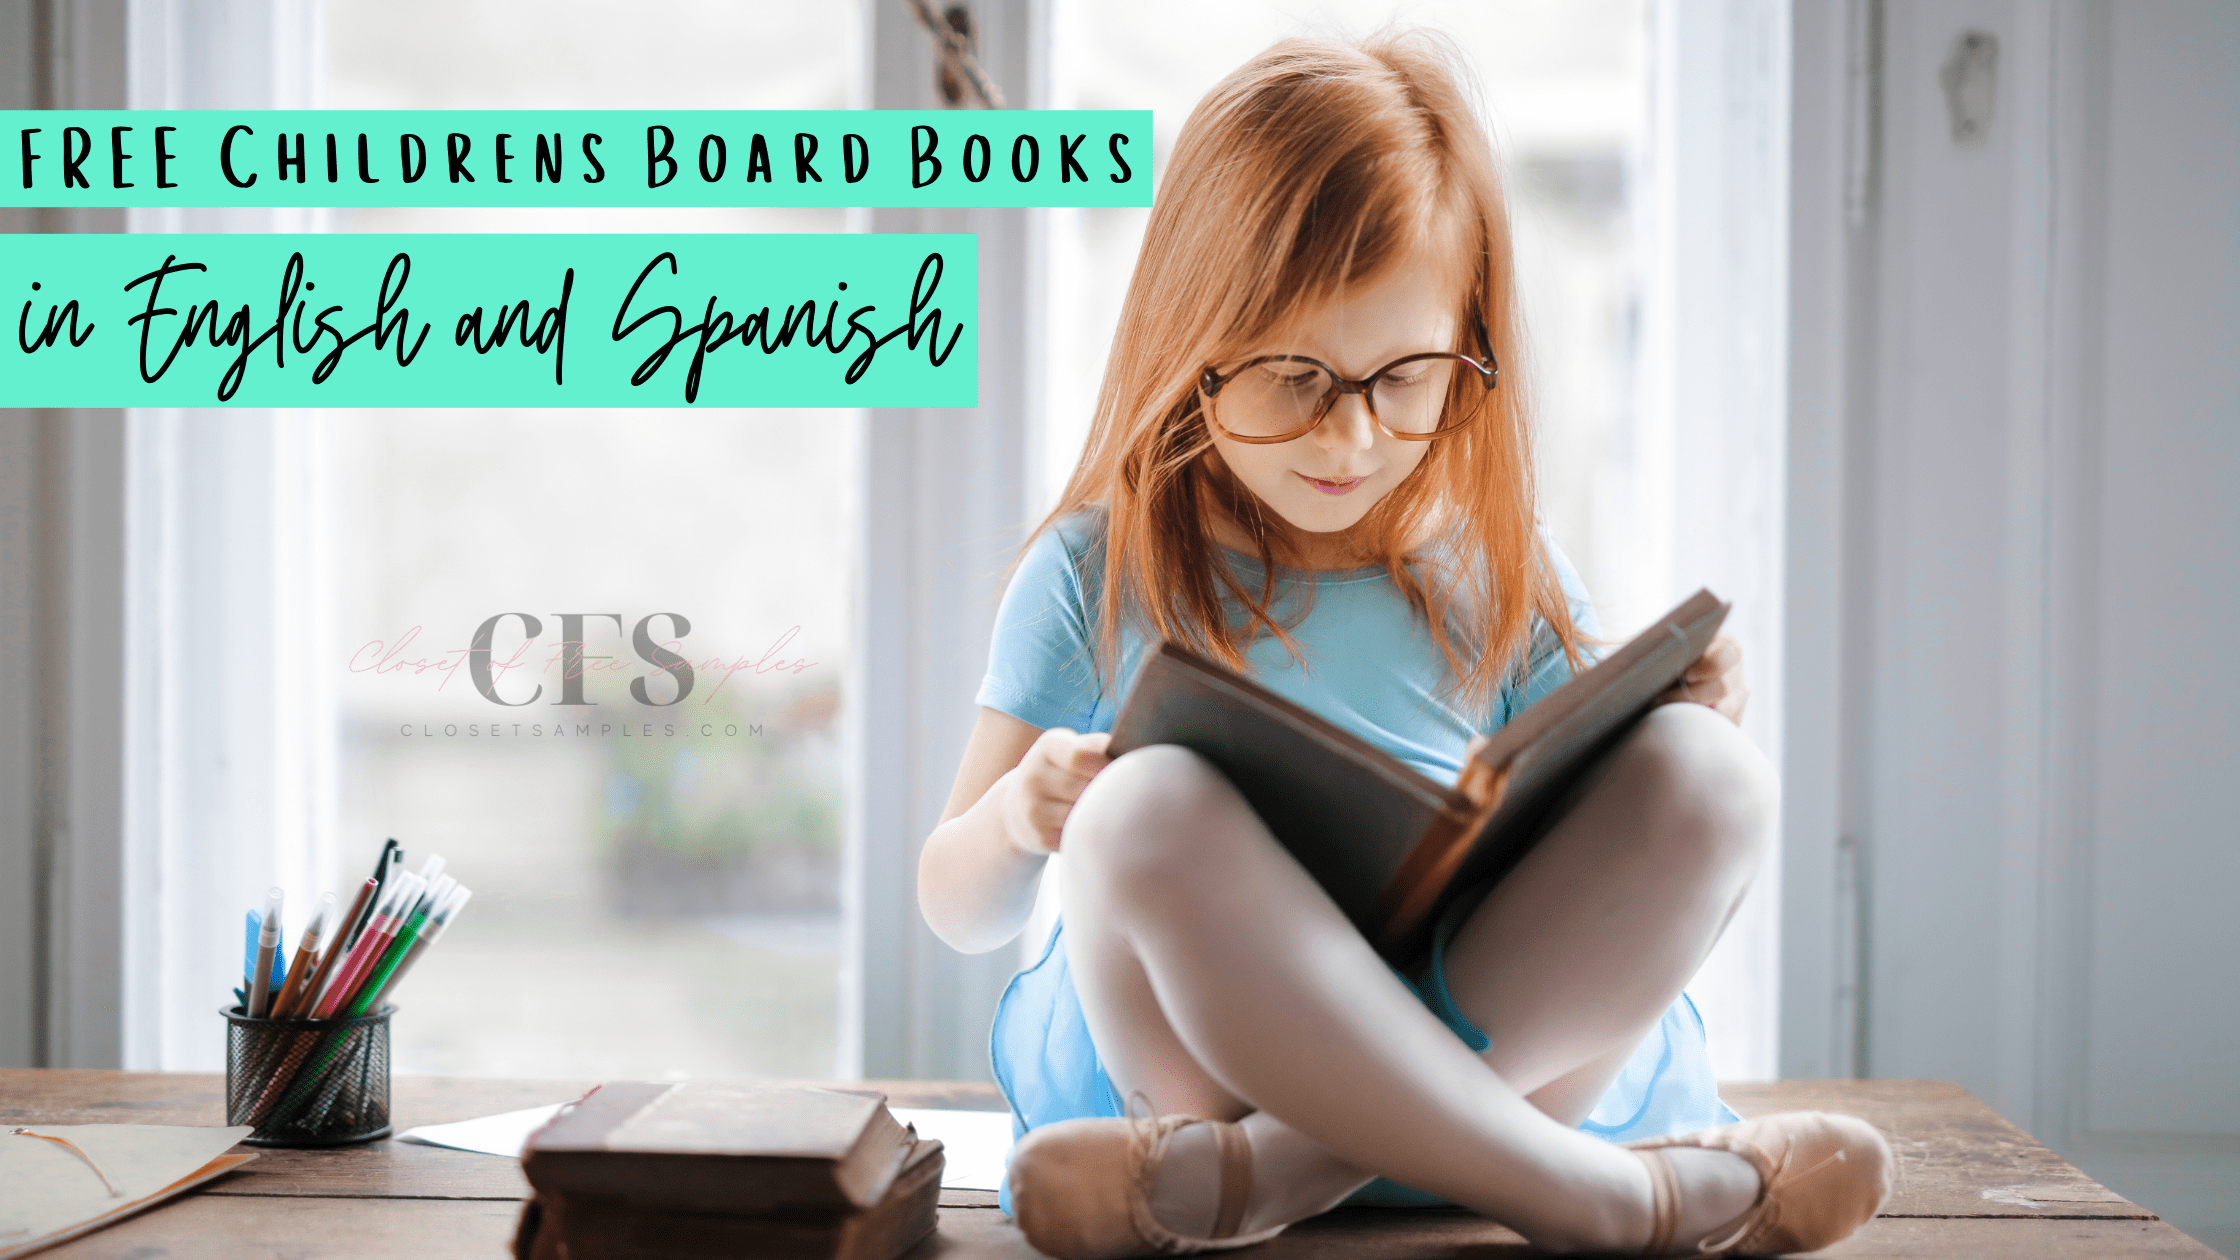 FREE-Childrens-Board-Books-in-English-and-Spanish-closetsamples.png